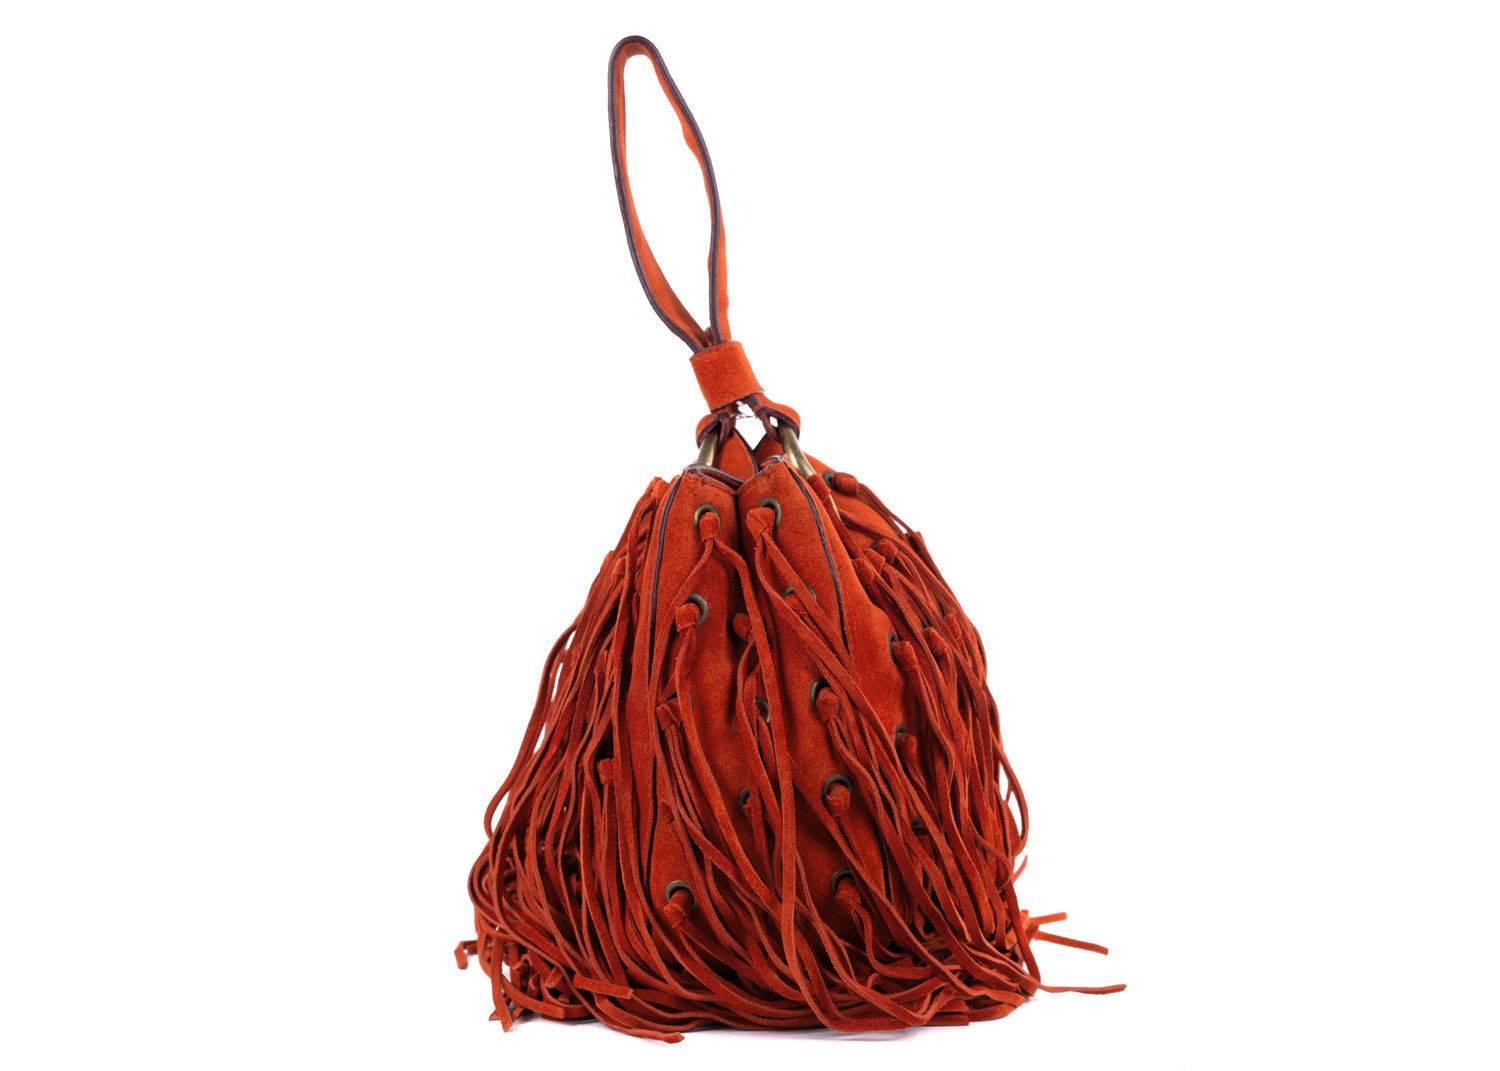 Roberto Cavalli orange suede wristlet bucket bag. This bag features eyelet patterns with fringe detailing and a wristlet. Perfect summer bag, this bag can be paired with dark wash shorts or denimm with a floral top and sandals for this bag to pop.

